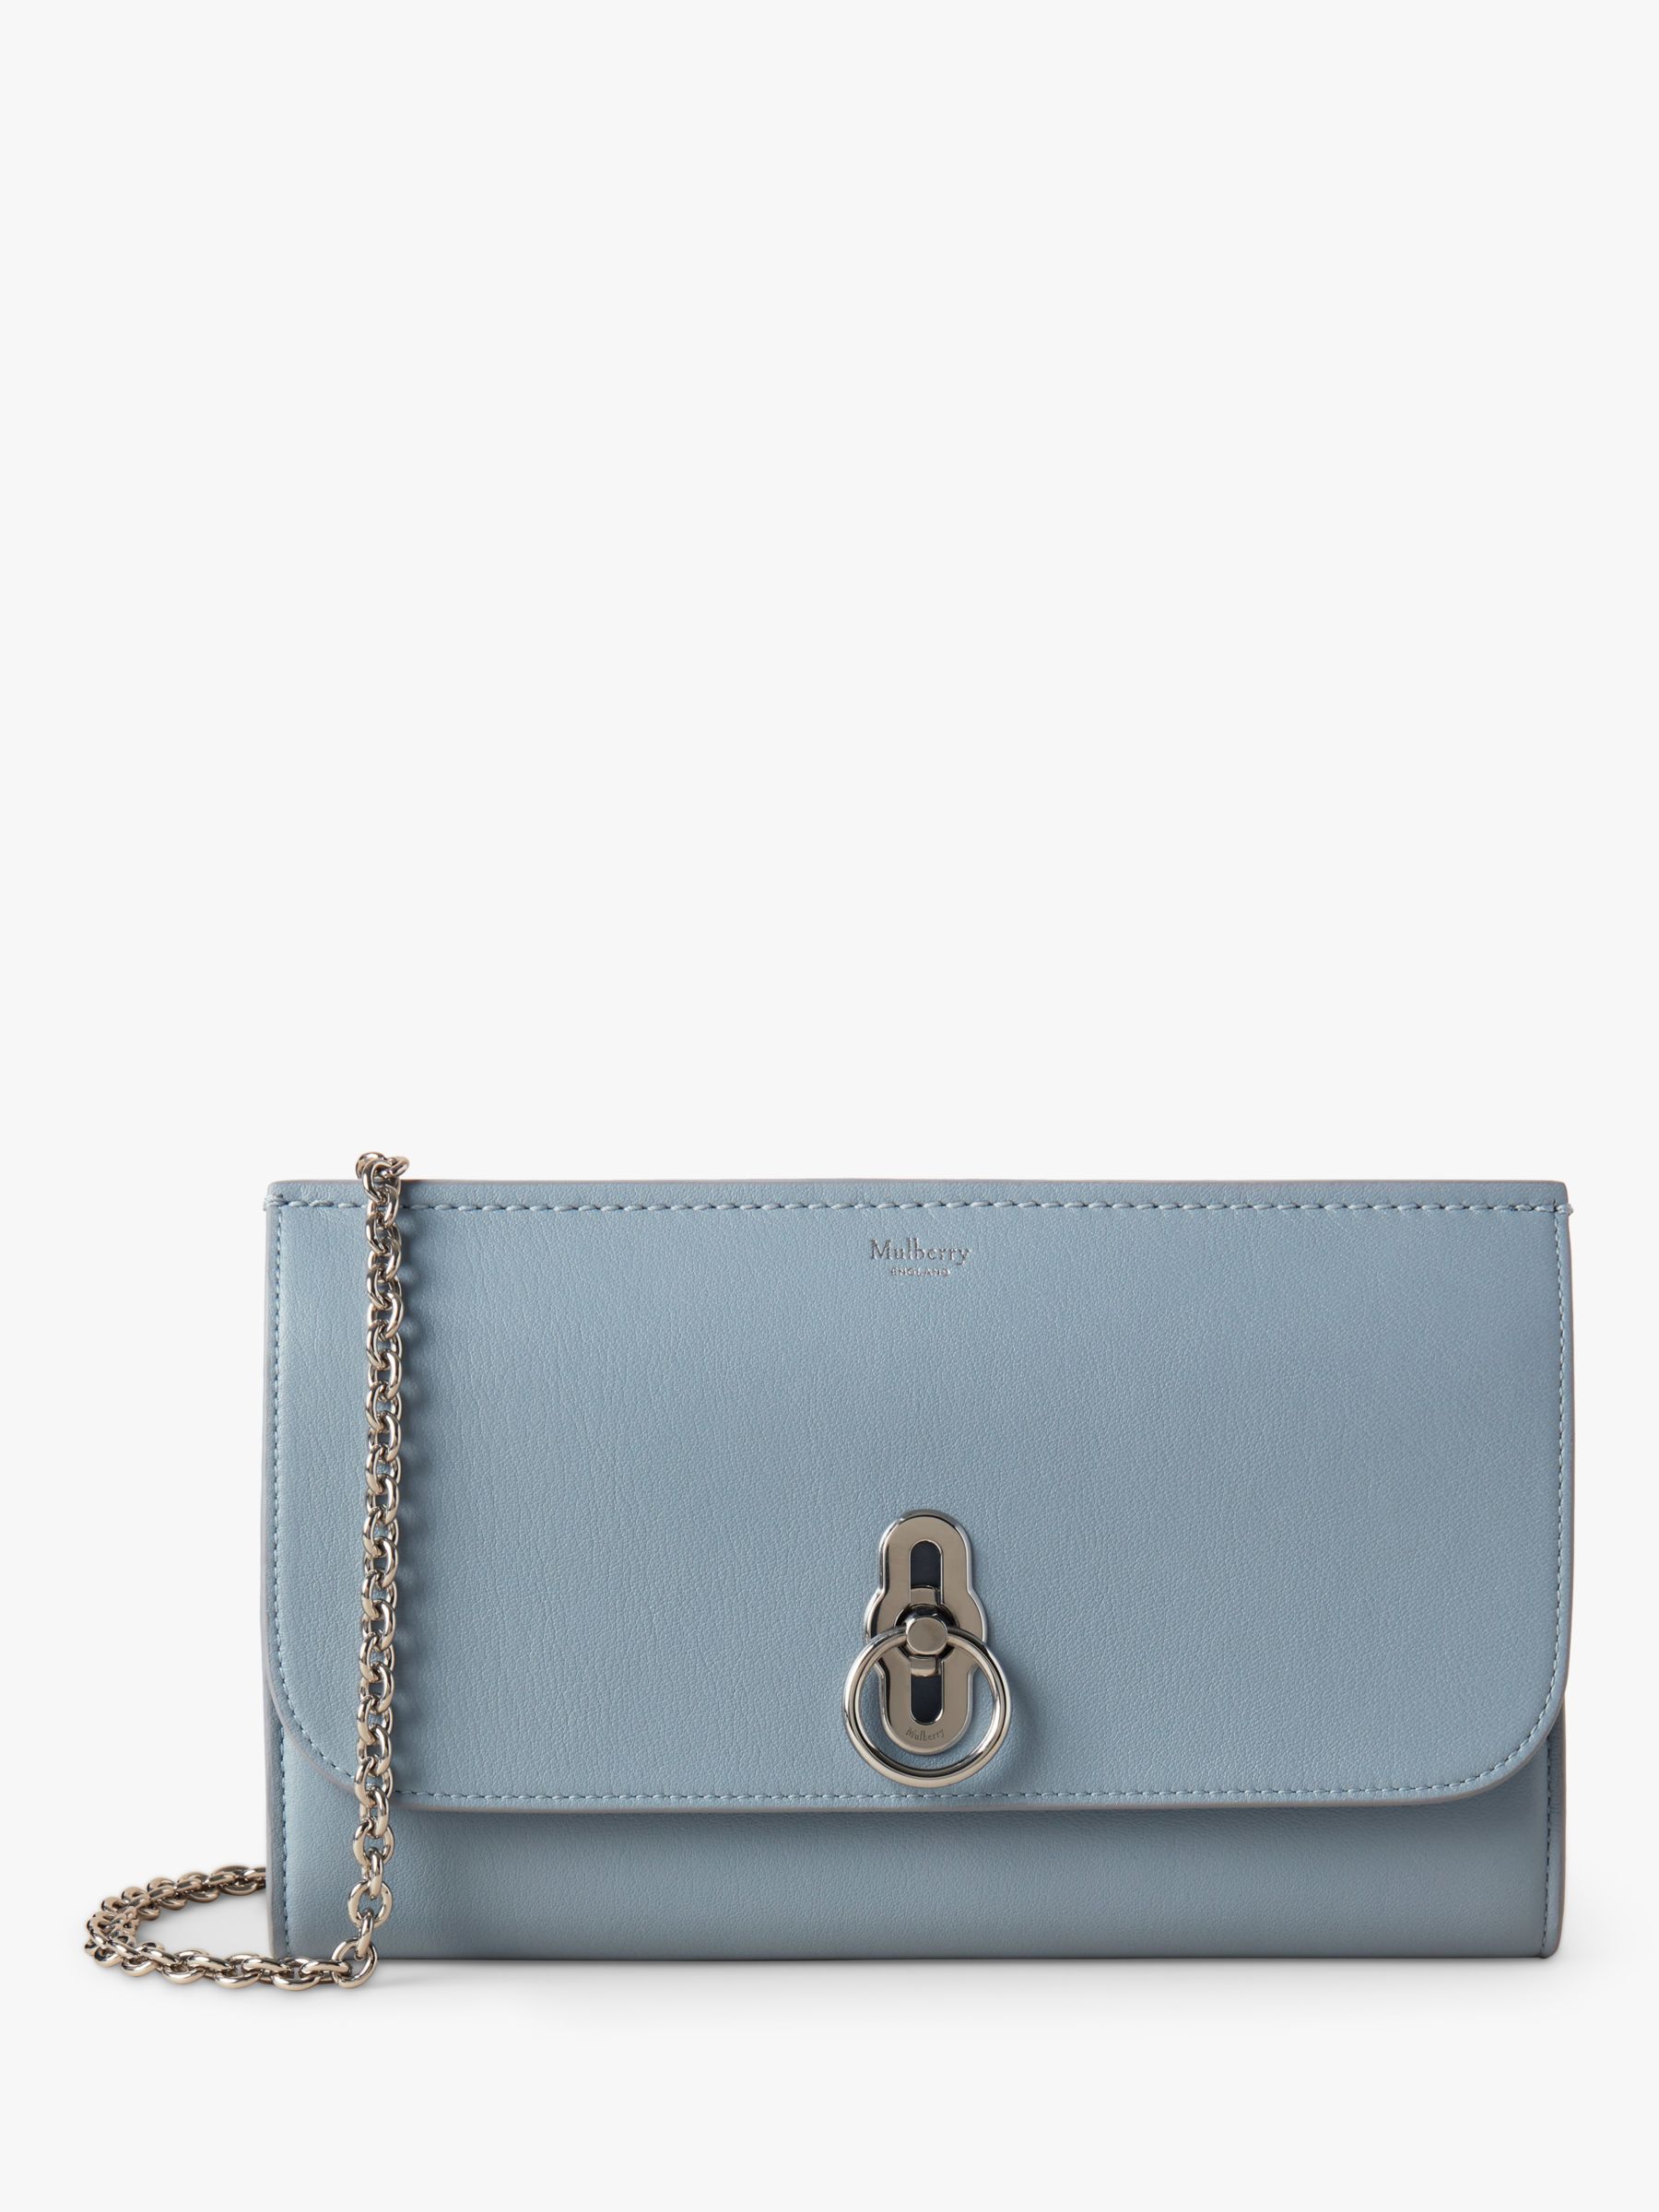 Mulberry Amberley Silky Calf Leather Clutch Bag, Cloud at & Partners